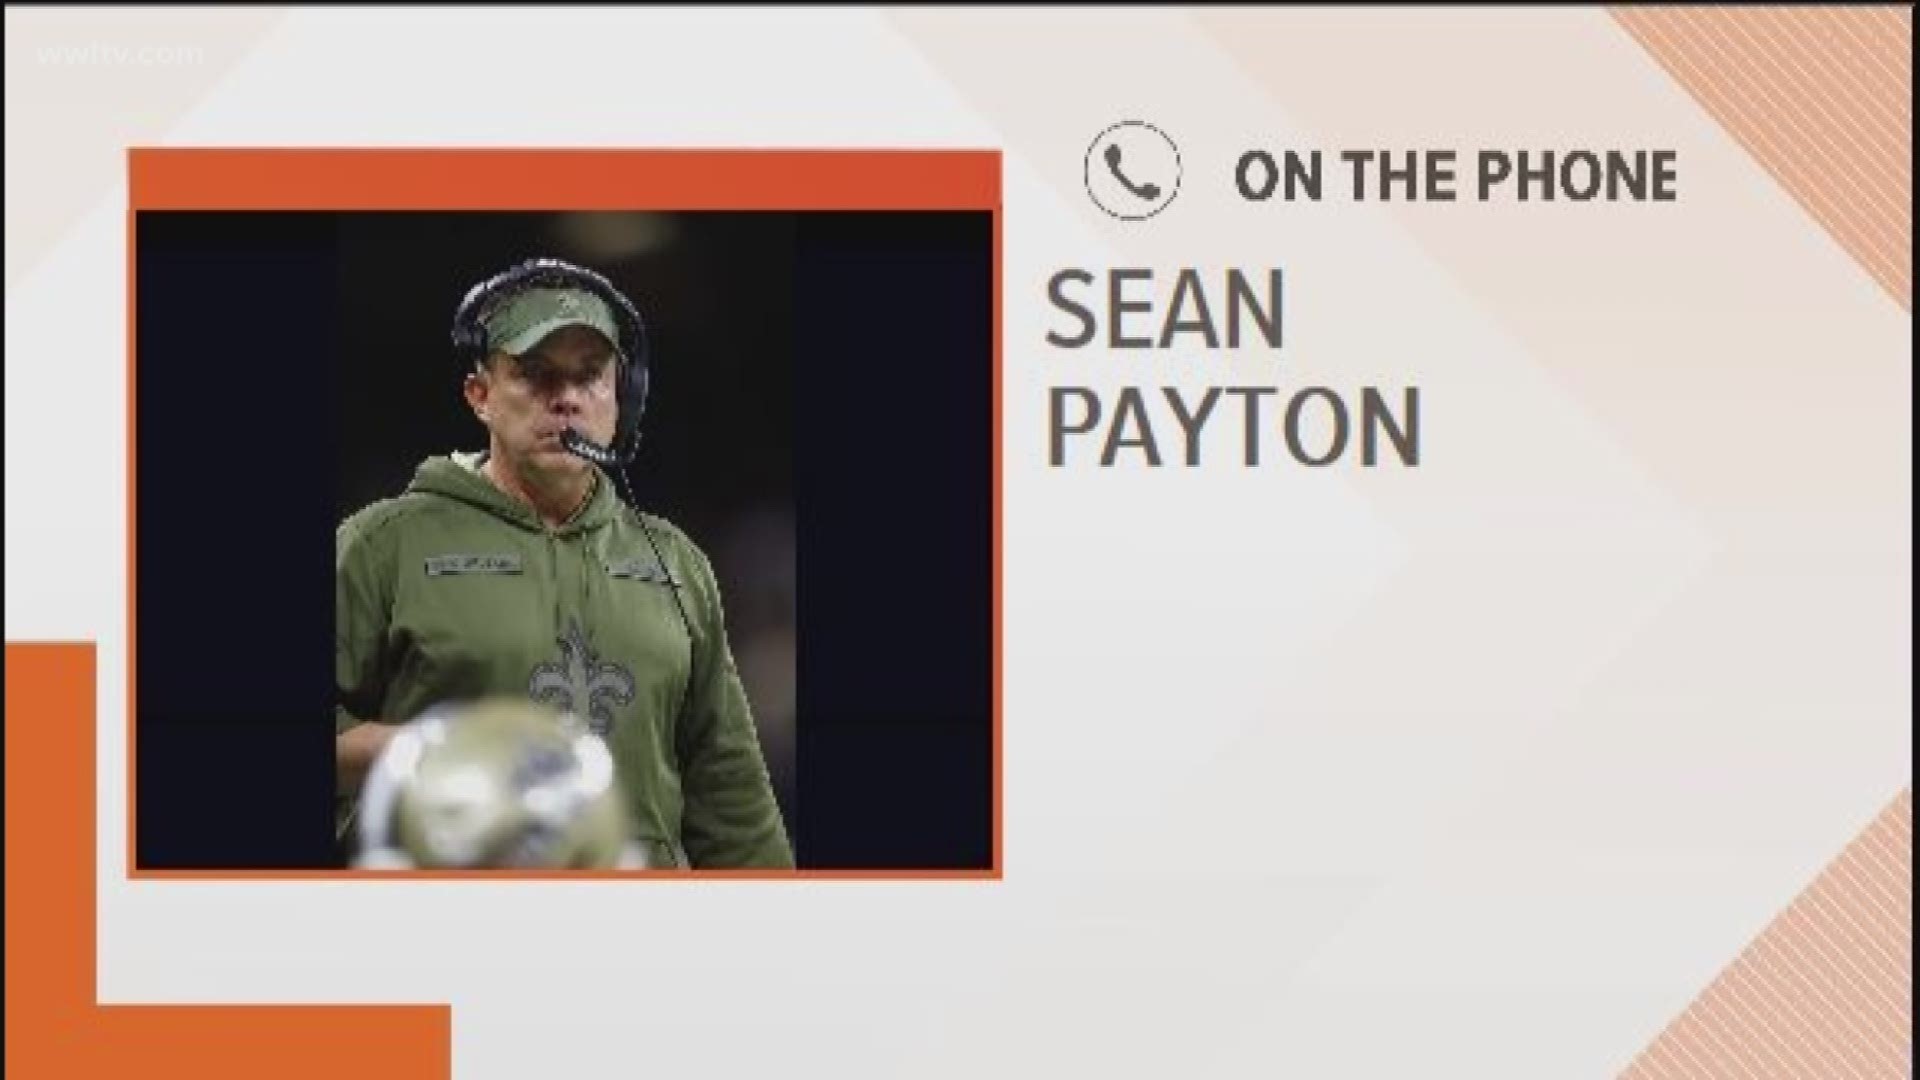 Saints head coach Sean Payton admits that he busted the fire alarm at Paul Brown Stadium prior to the game in a Monday press conference